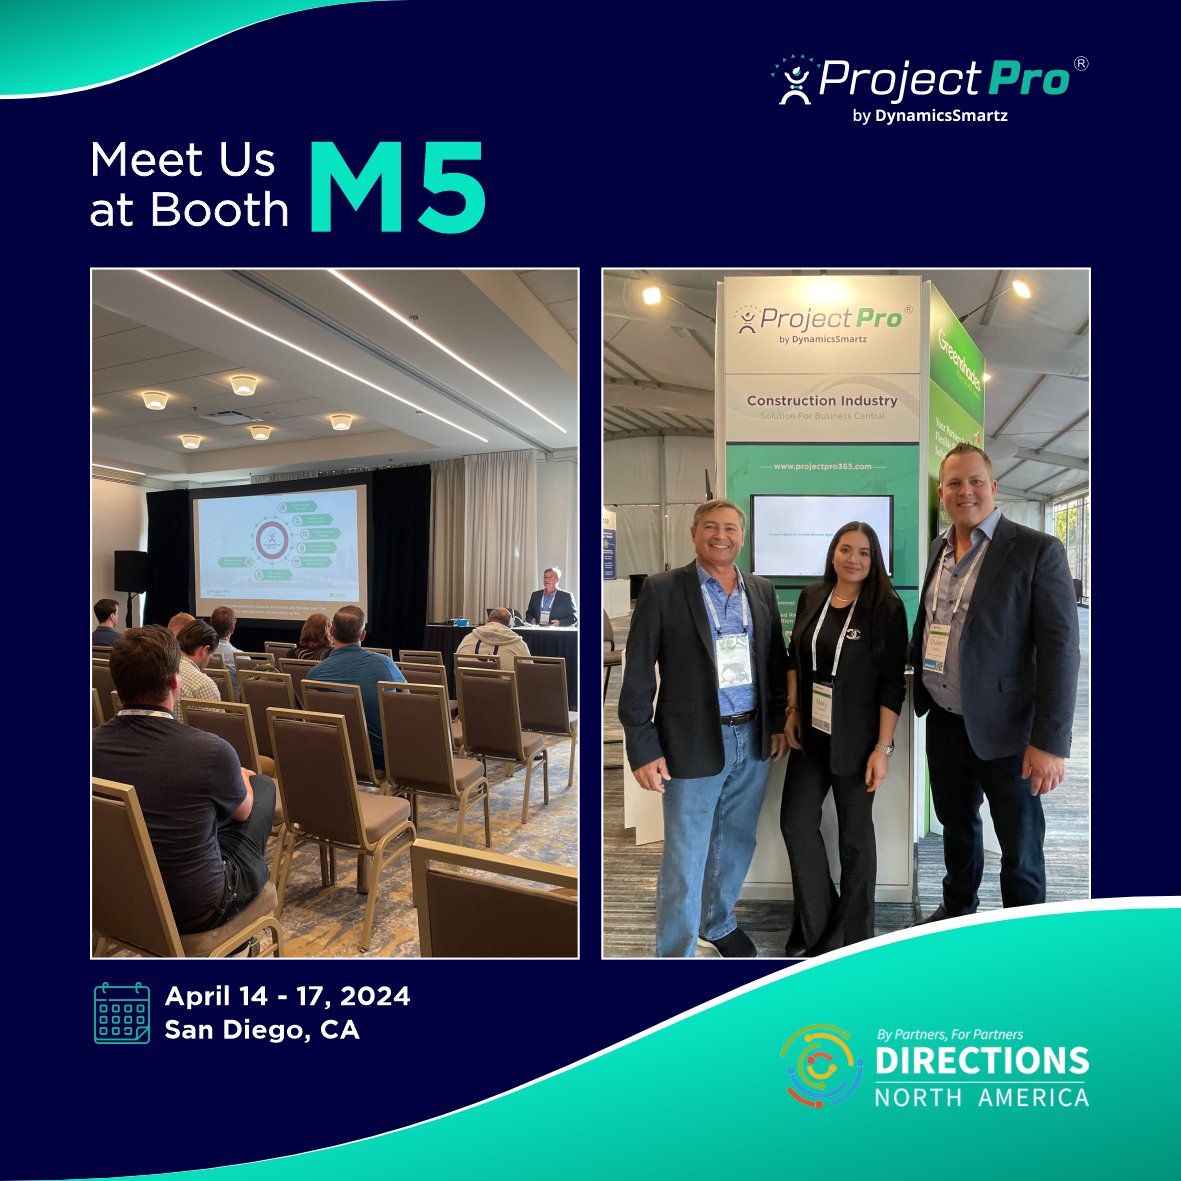 Gearing up for a successful Day 3 at the Directions North America event. Drop by booth no. M5 to say “hi” to our panel of experts – Shawn, Mary, and Ed – who can help you scale new heights in the construction industry and more with ProjectPro.

#DirectionsNA #MicrosoftDynamics365